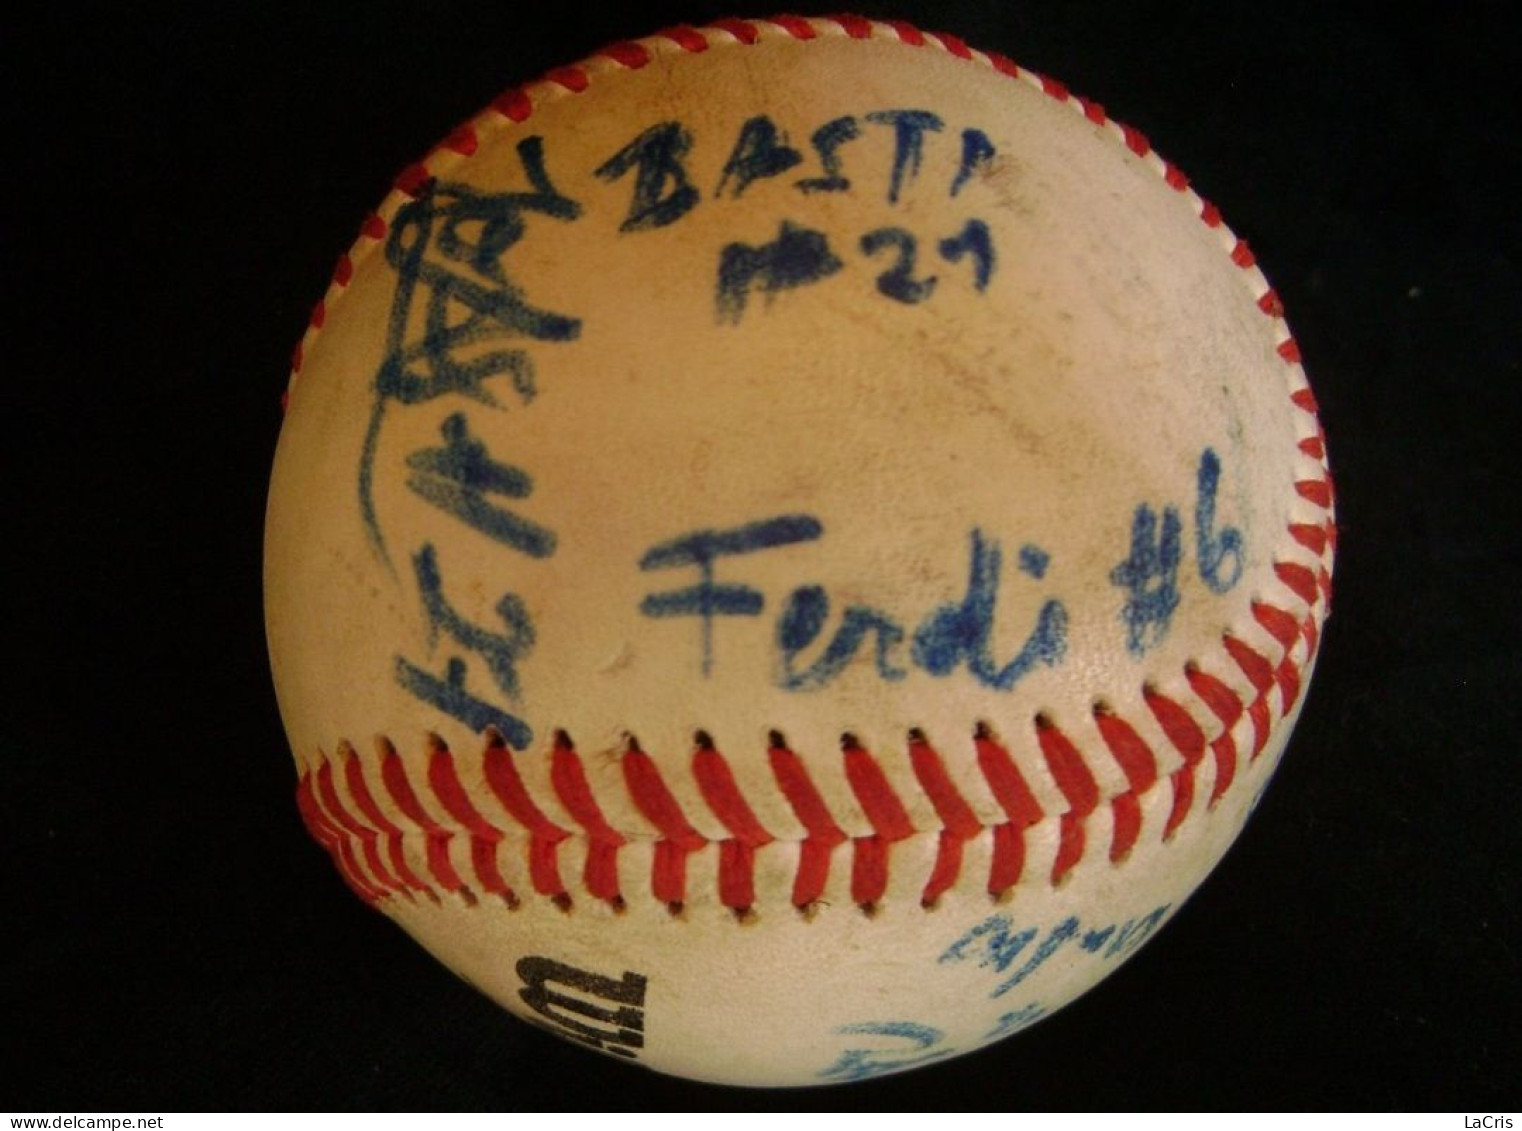 Old American Hand-Signed 11 Baseball Players - Autogramme